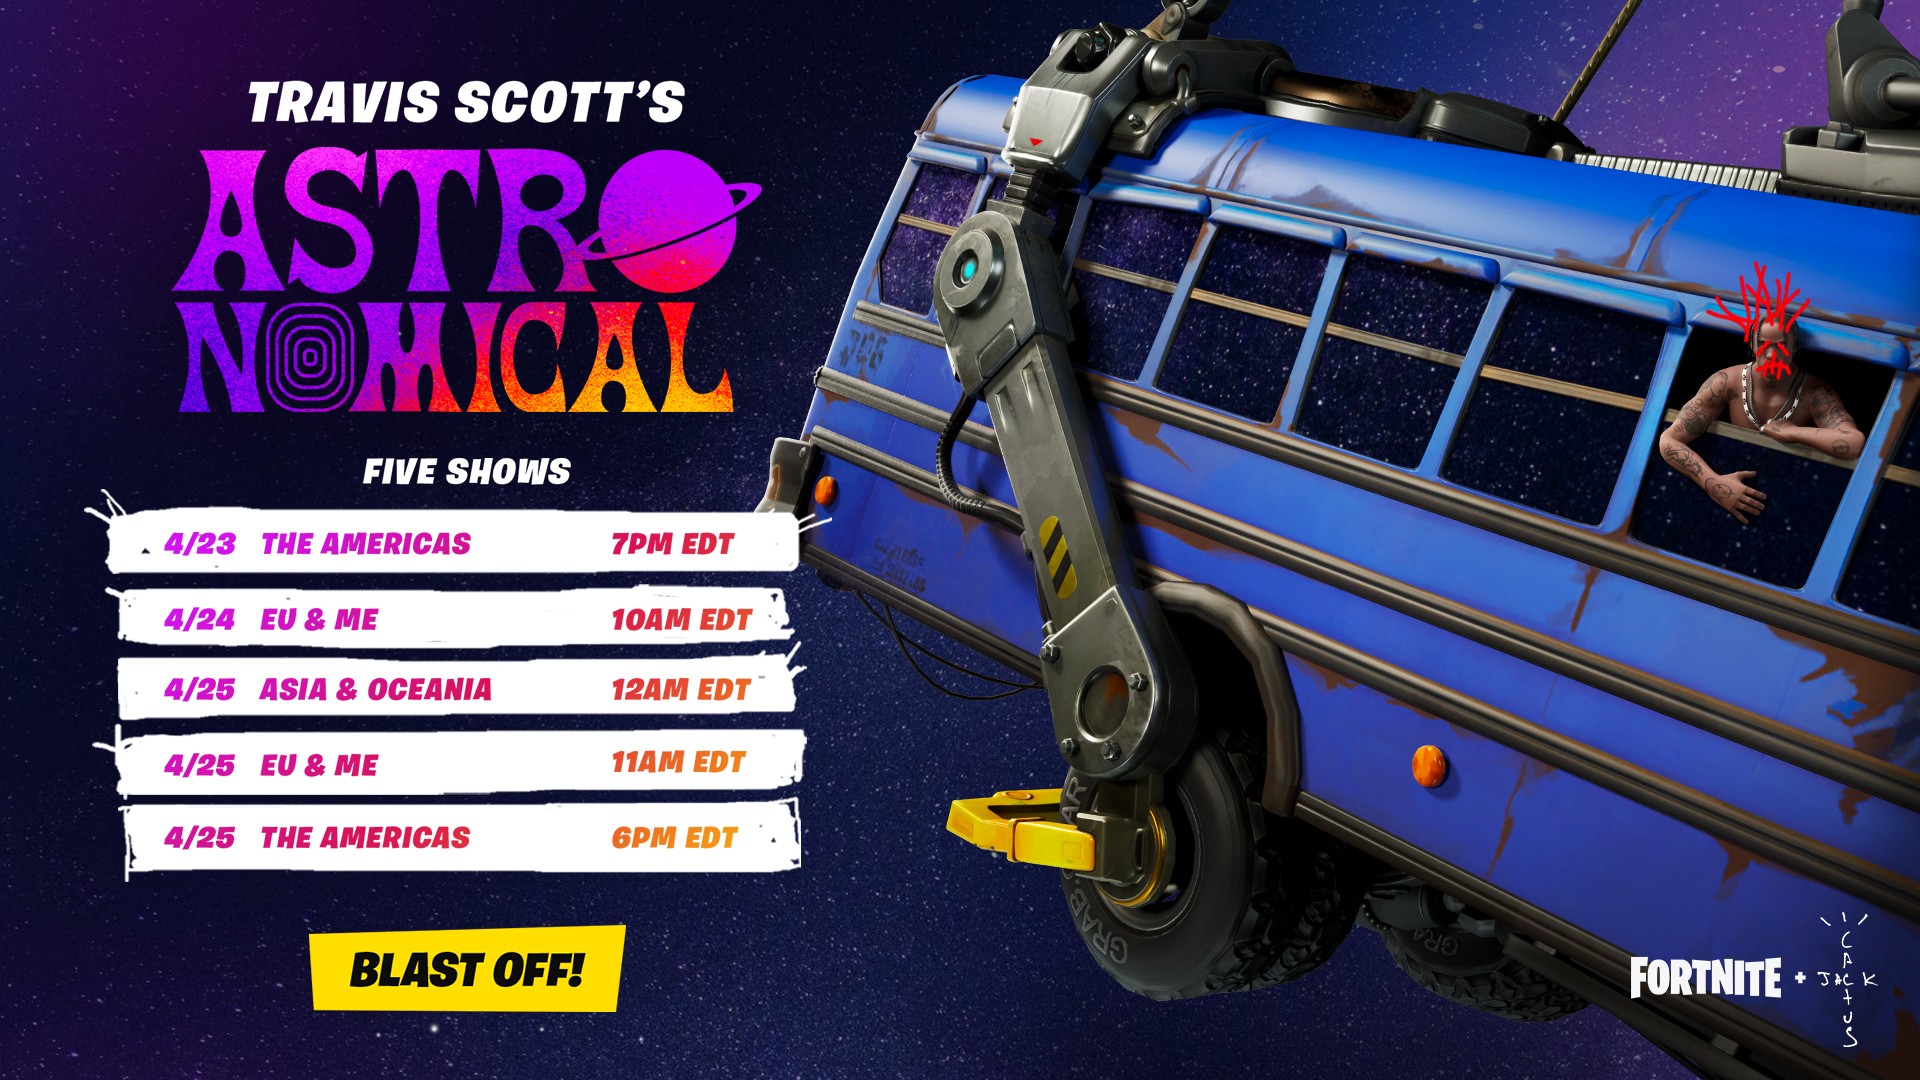 Fortnite And Travis Scott Present Astronomical Watch On Xbox